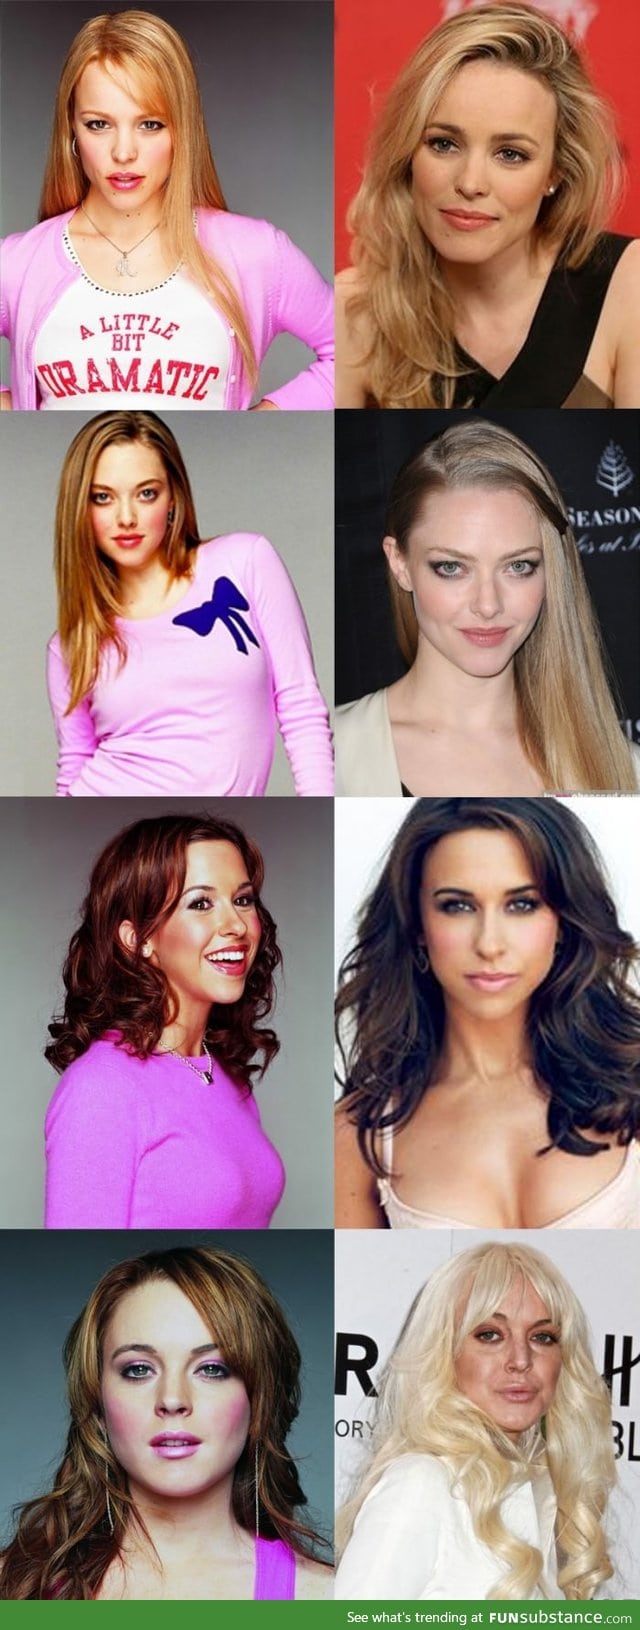 Mean Girls. Feeling old now?